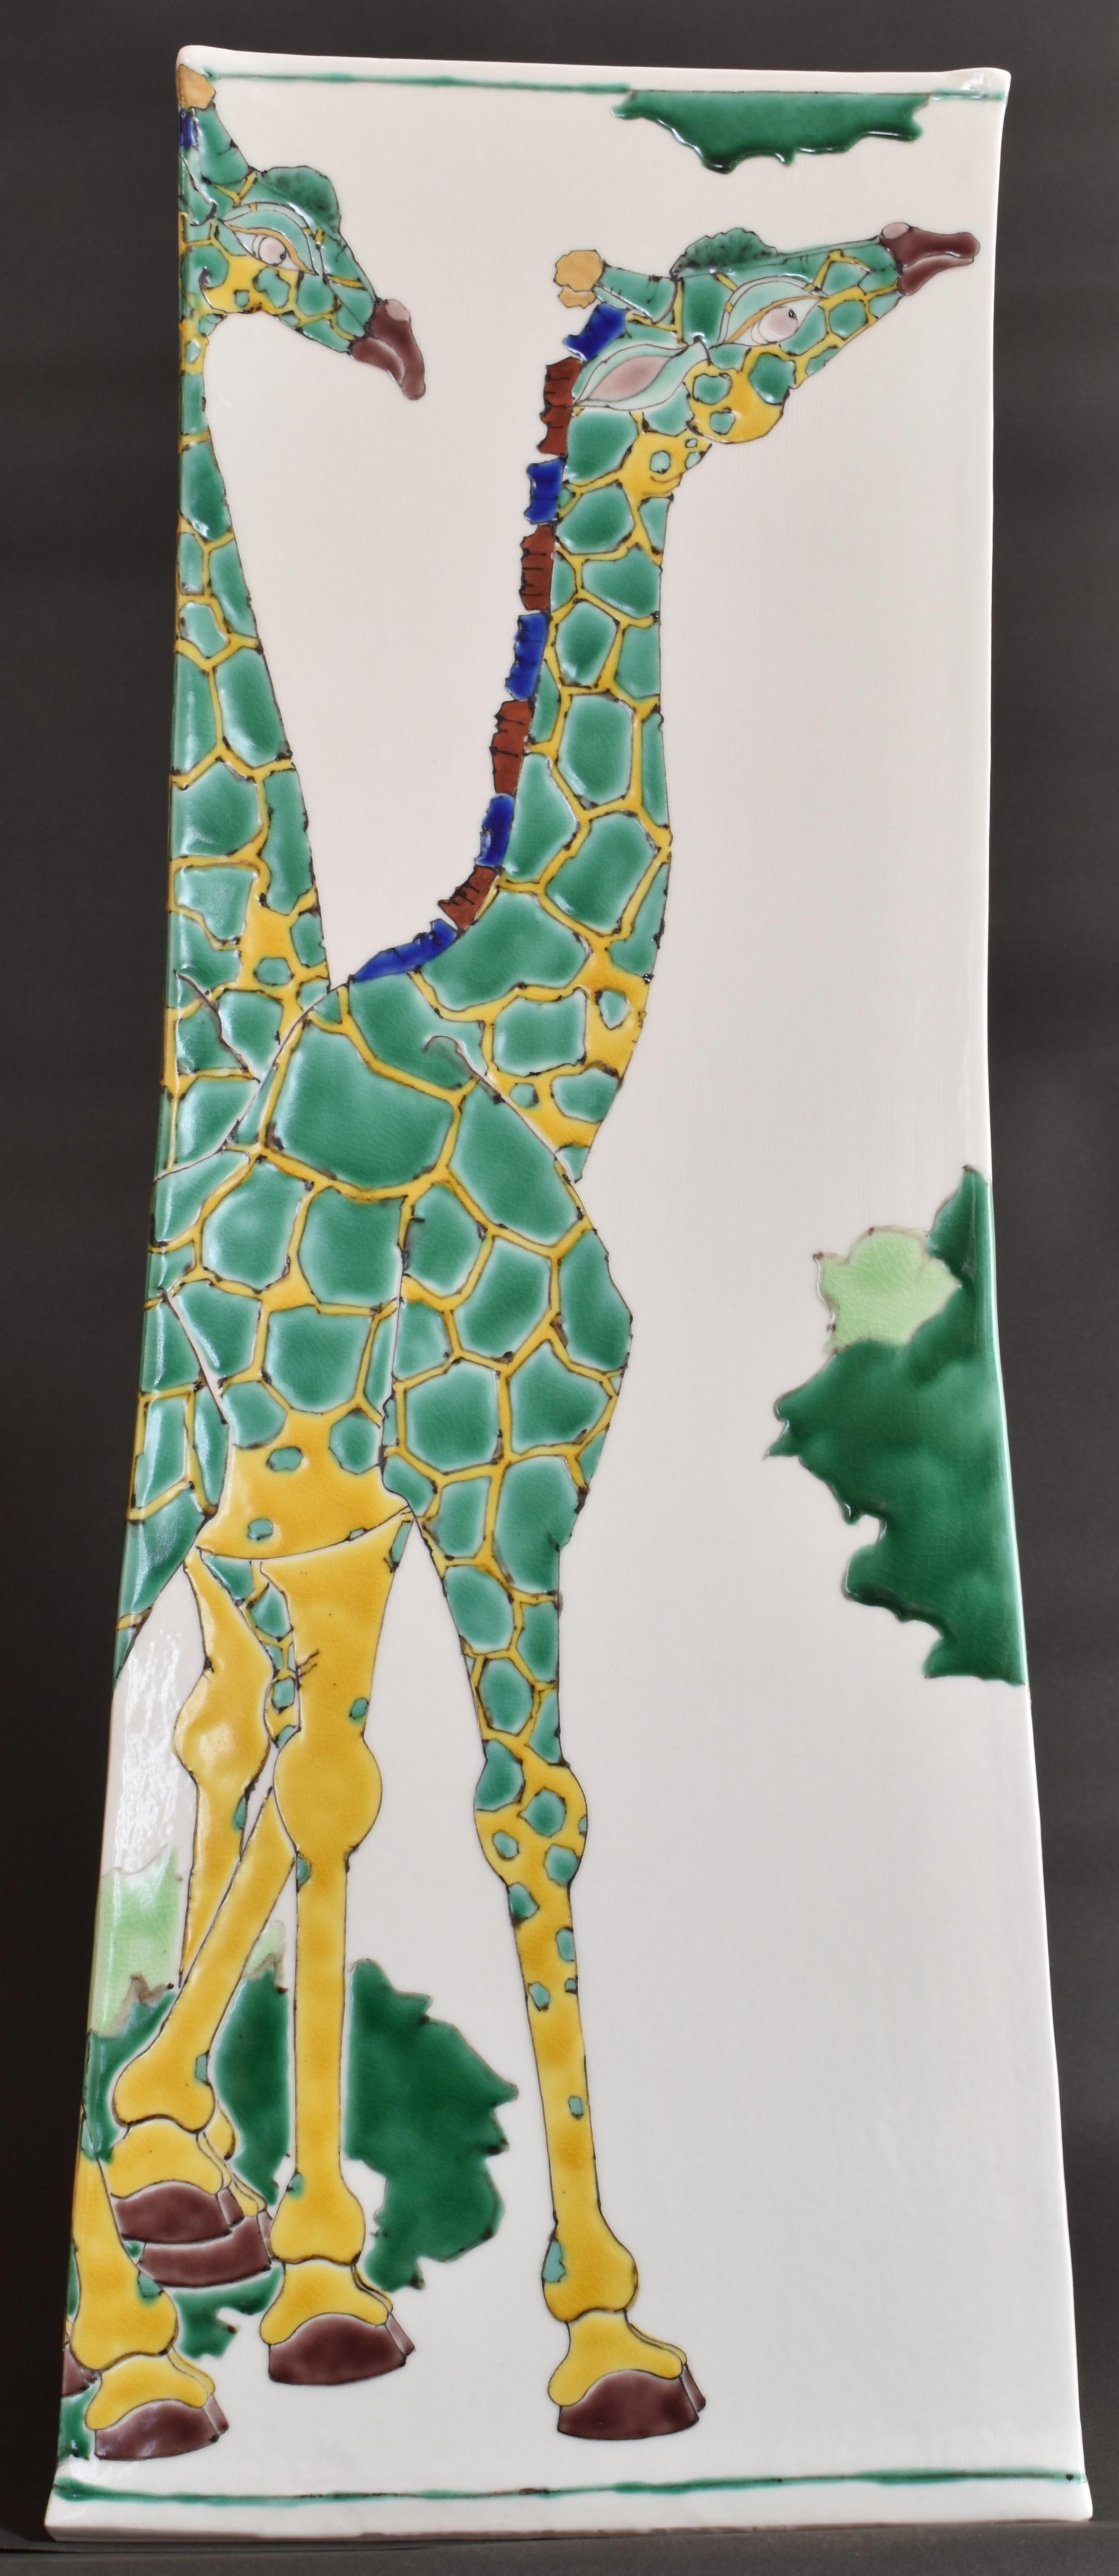 Very large unique contemporary Japanese Kutani hand painted porcelain vase in a stunning unusual handcrafted rectangular shape body, with a unique interpretation of giraffes in vivid green and yellow. This is part of a series of this highly regarded